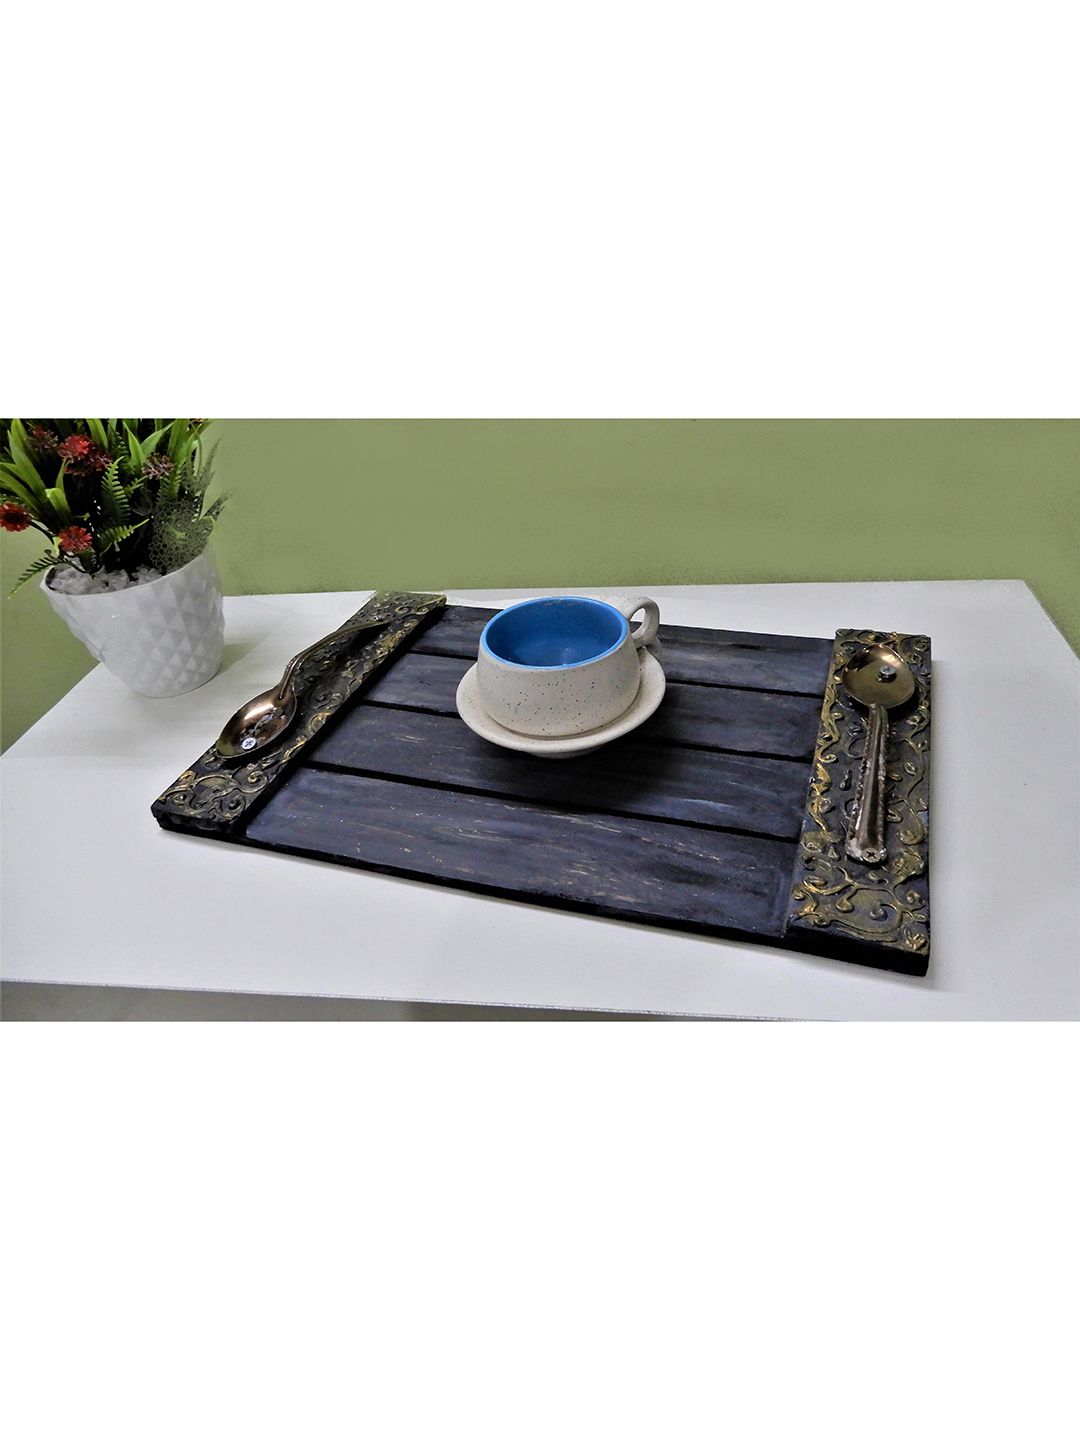 Disoo Fashions Grey & Gold-Toned Handmade Wooden Tray With Spoons Handle Price in India